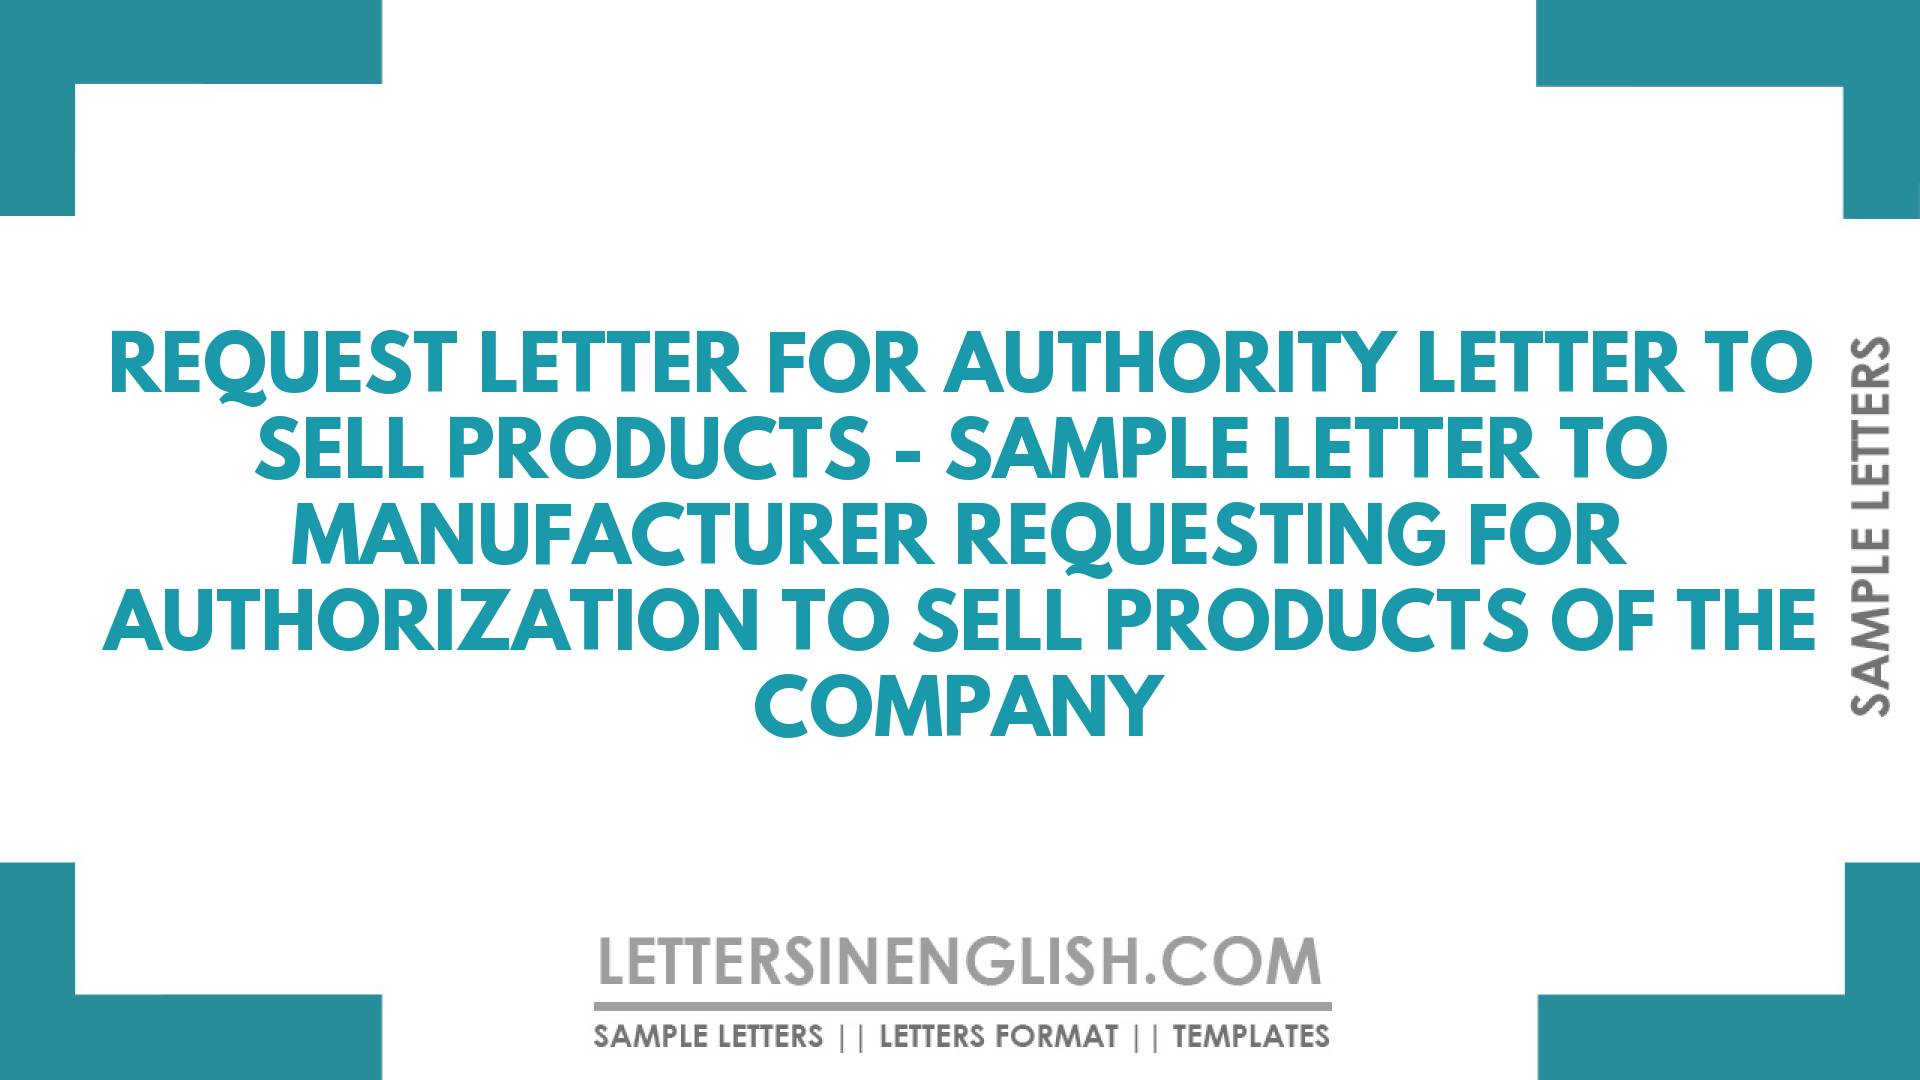 Request Letter for Authority Letter to Sell Products – Sample Letter to Manufacturer Requesting for Authorization to  Sell Products of the Company